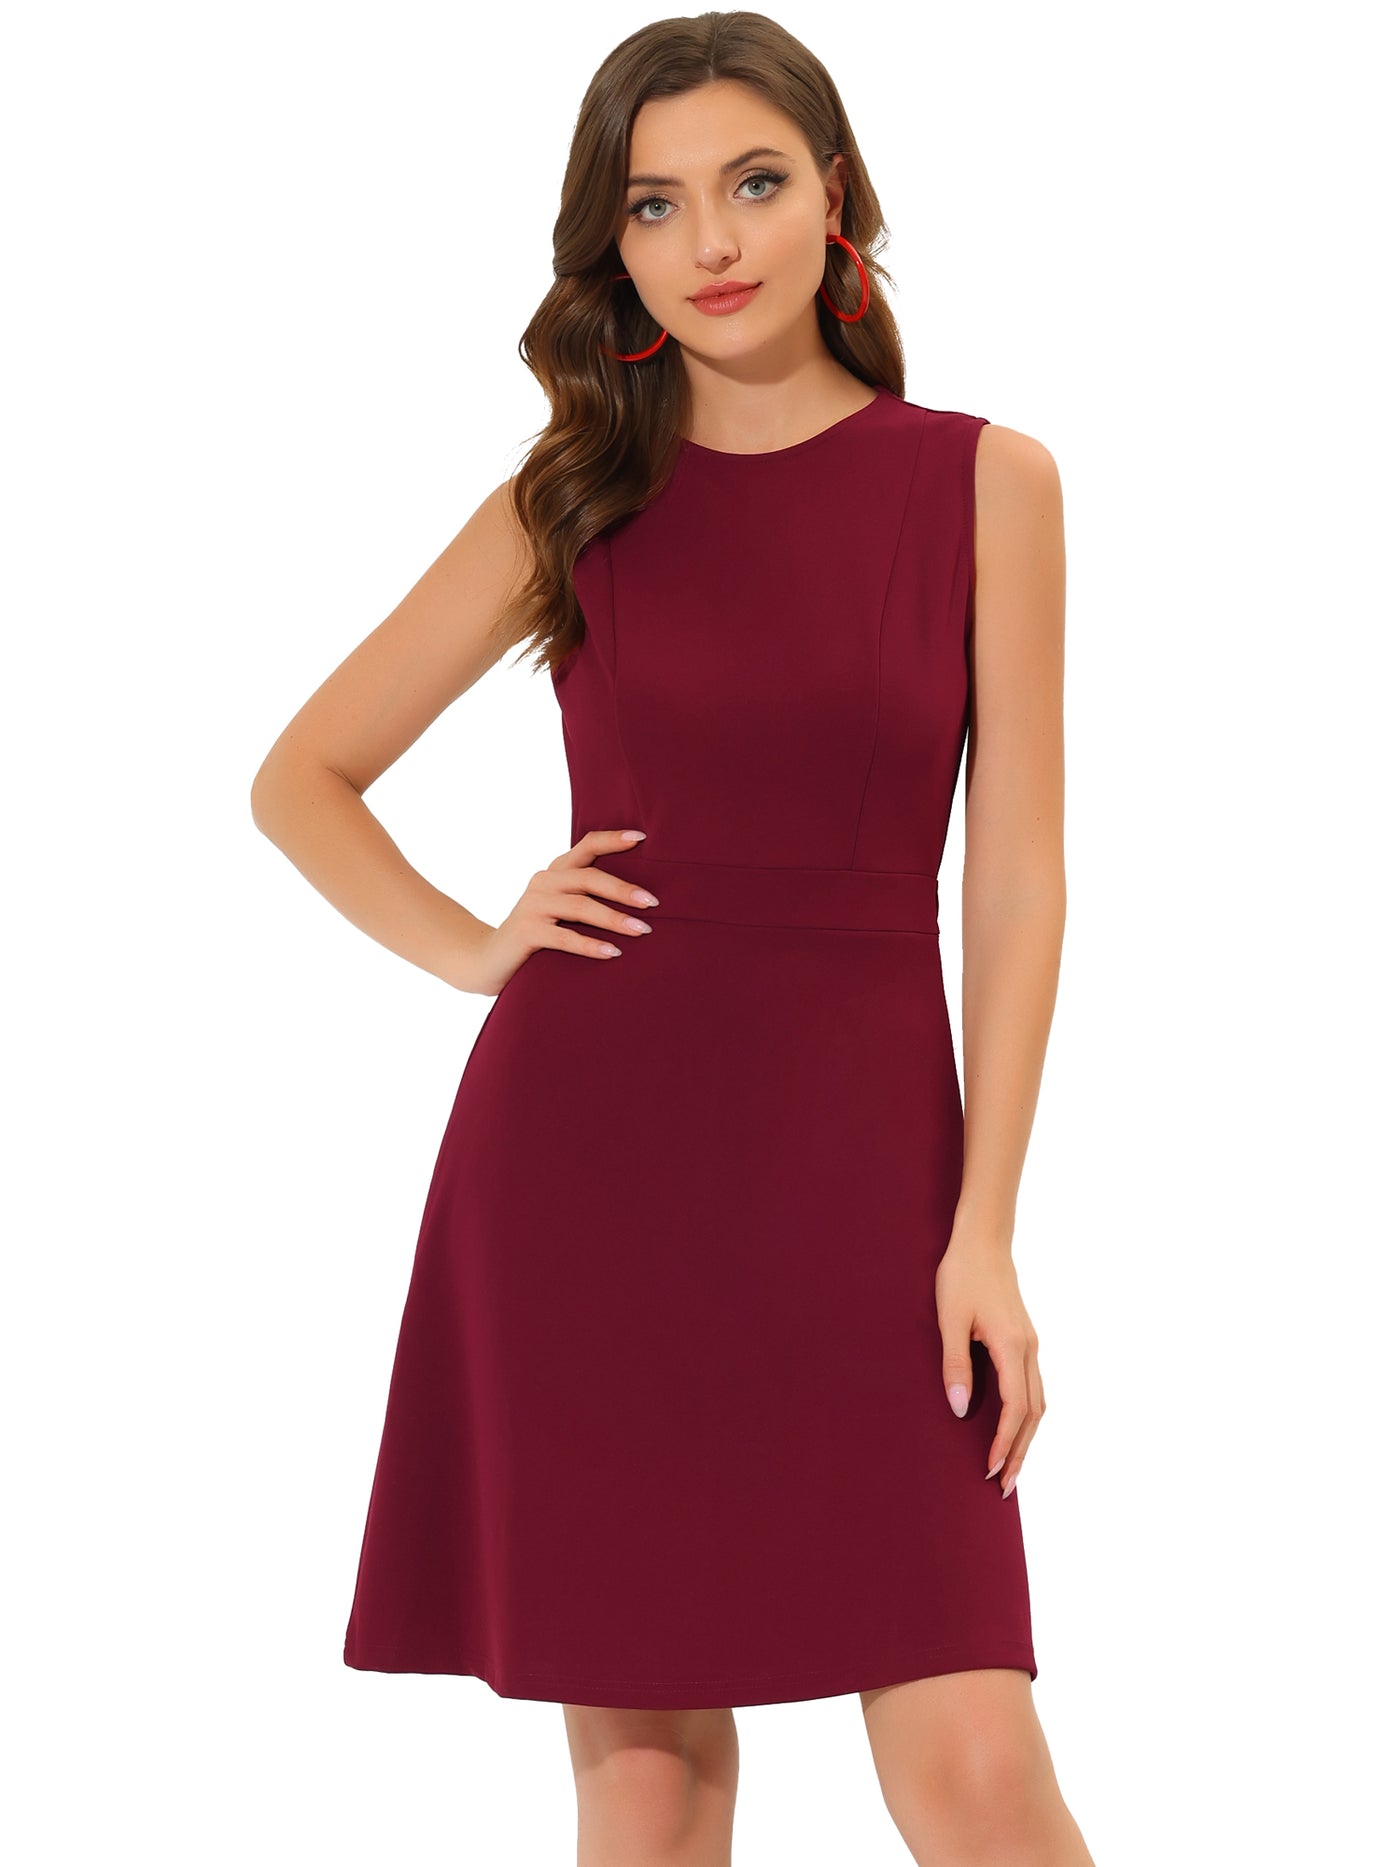 Allegra K Work Round Neck Solid Color Sleeveless Fit and Flare Dress